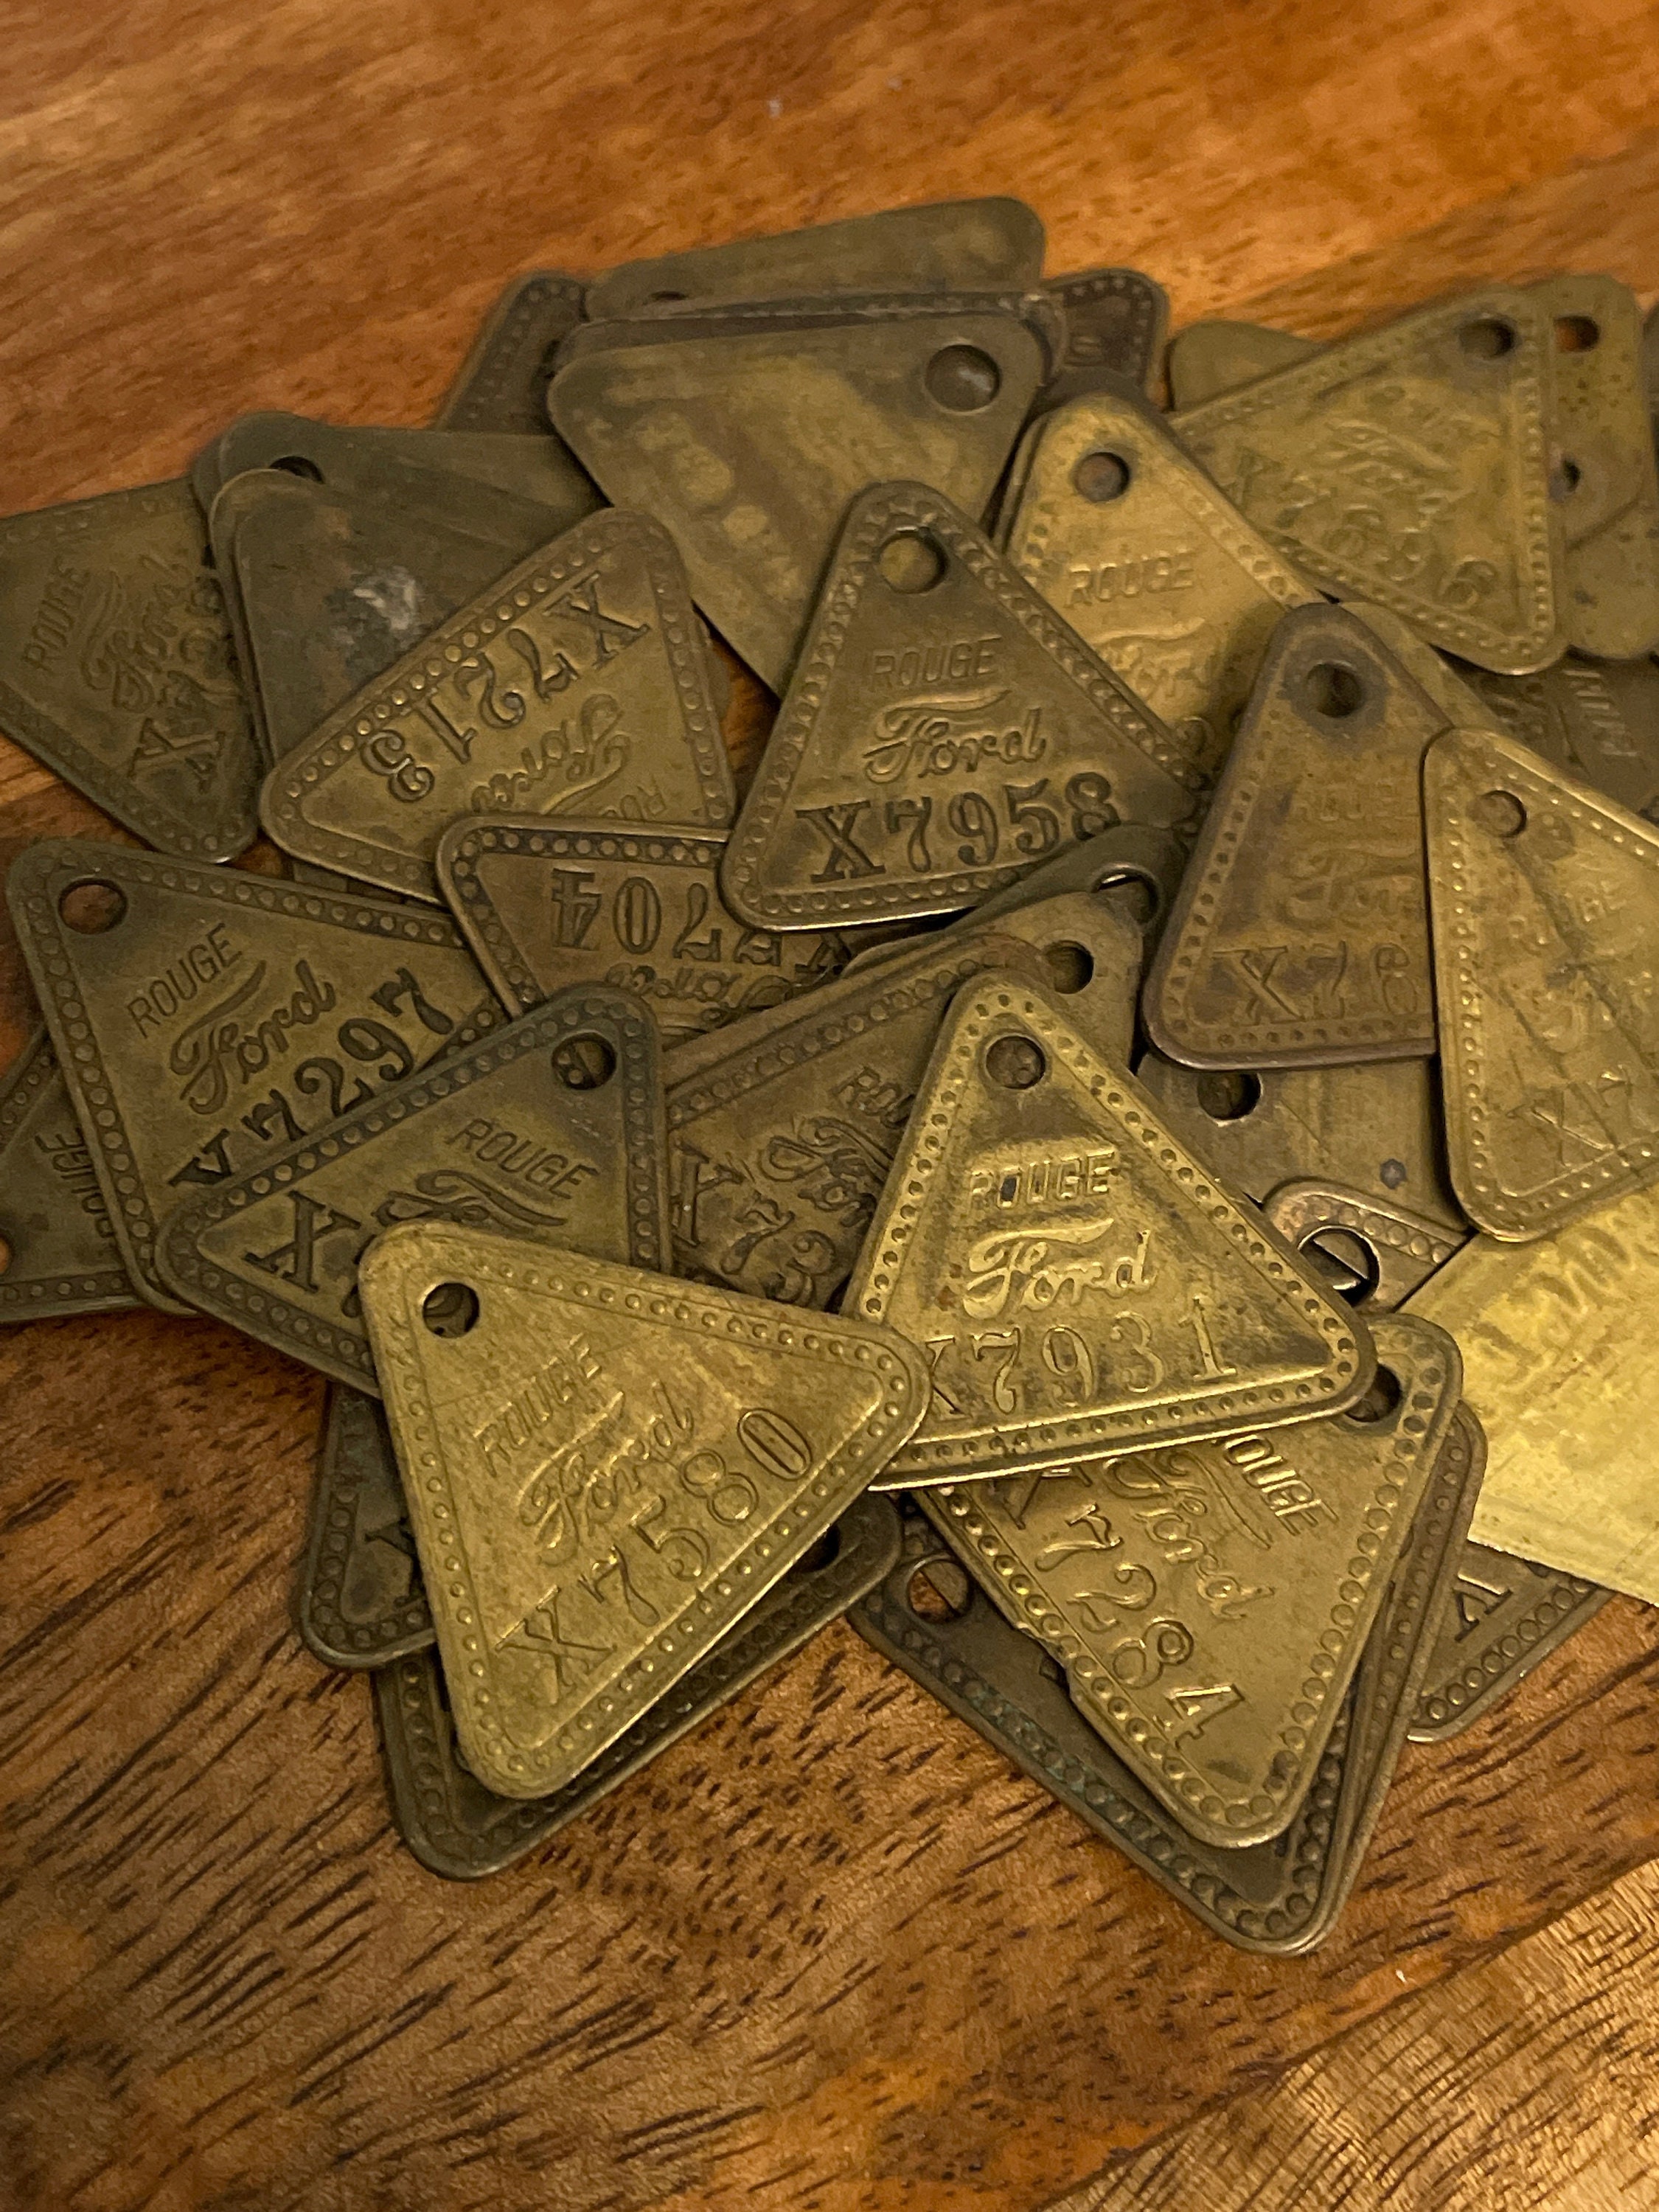 Vintage Brass Tags – Relics Salvage